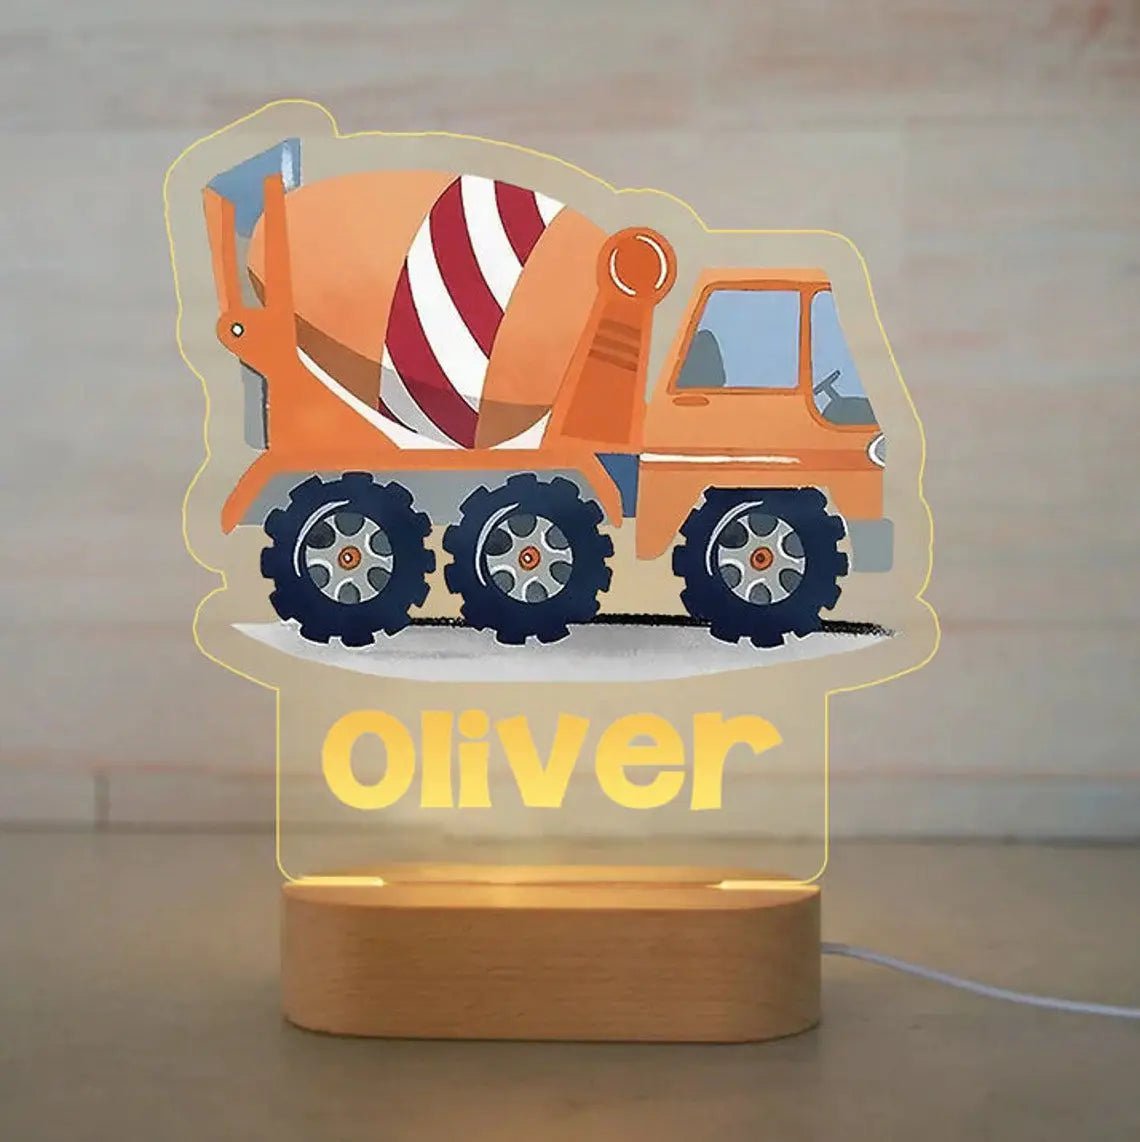 Customized Animal-themed Night Light for Kids - Personalized with Child's Name, Acrylic Lamp for Bedroom Decor Warm Light / 30Orange Truck